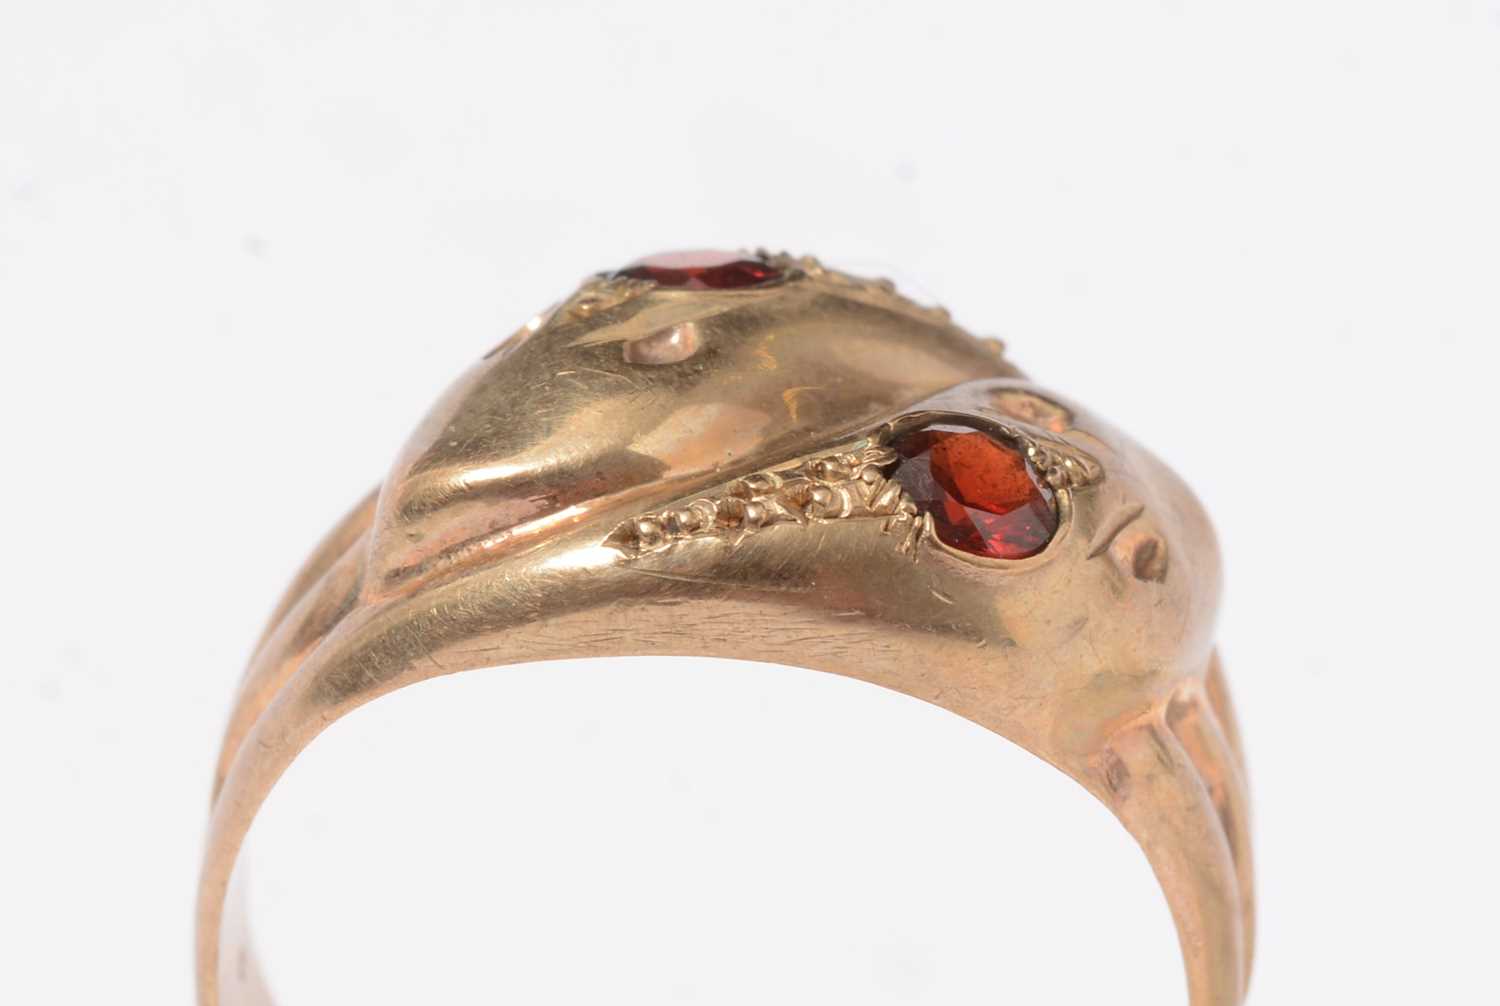 A vintage 9ct gold and garnet serpent ring.